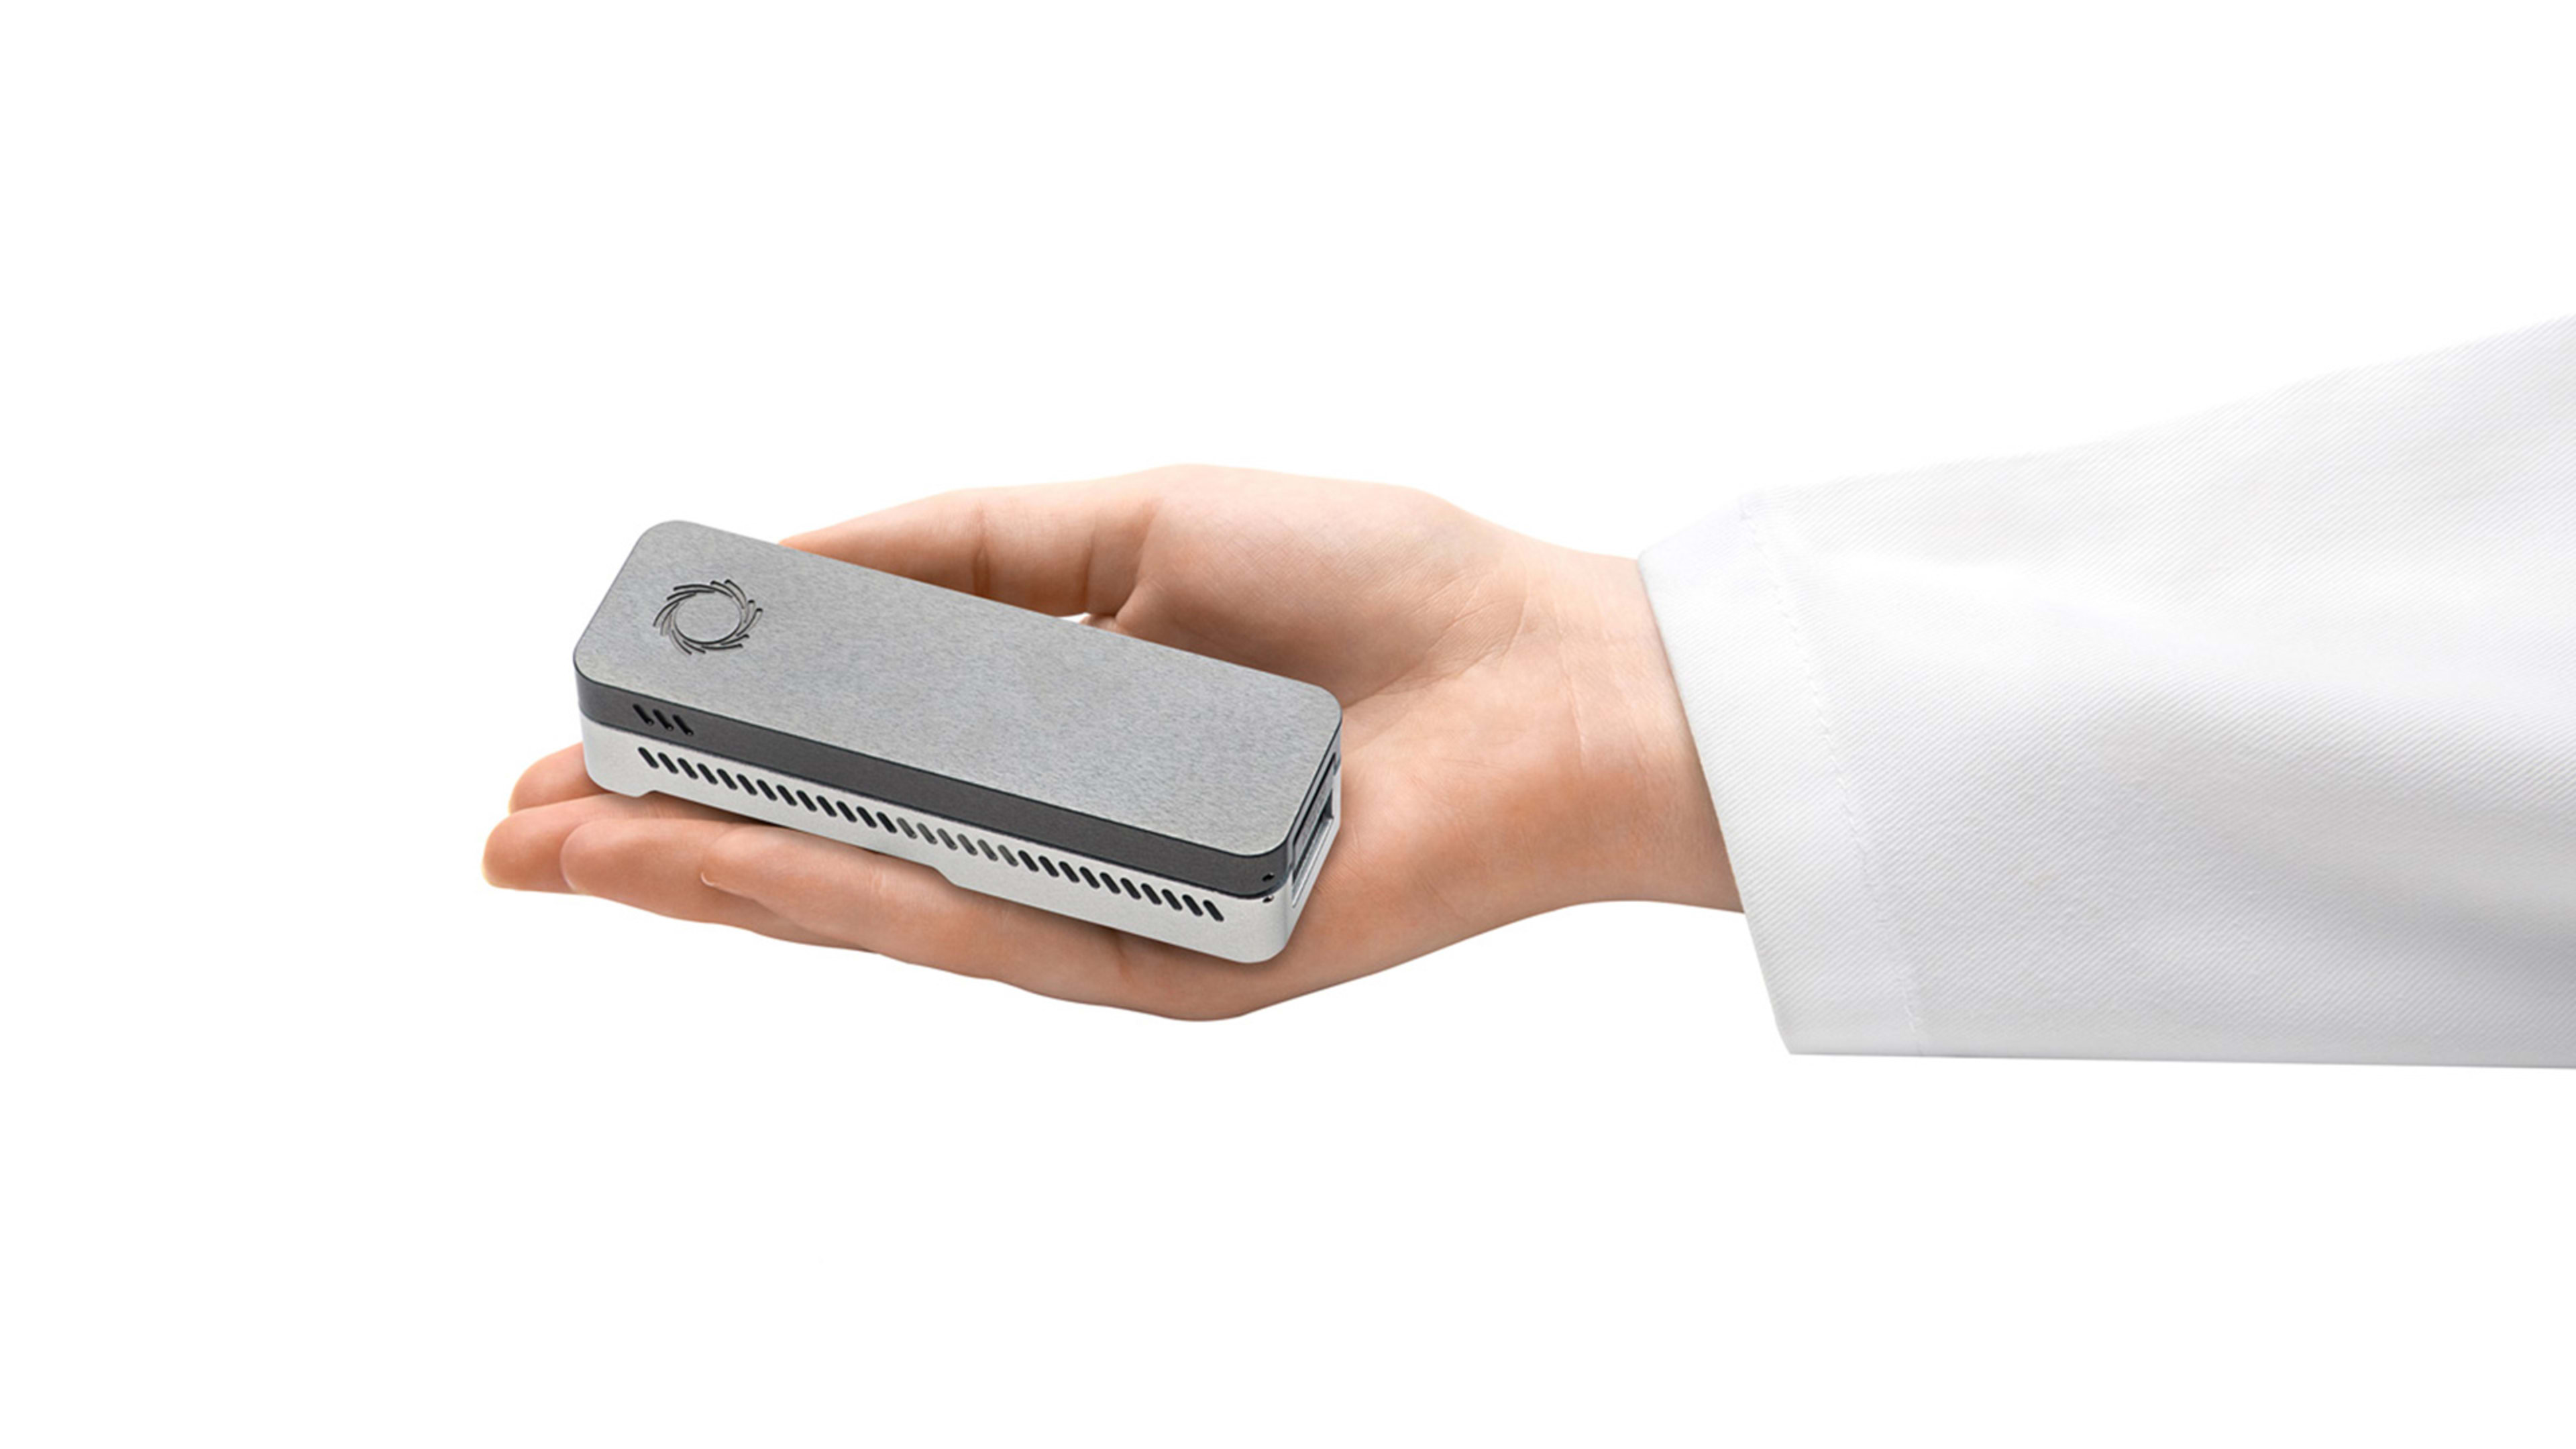 The World’s Smallest DNA Reader Could Prevent Major Outbreaks